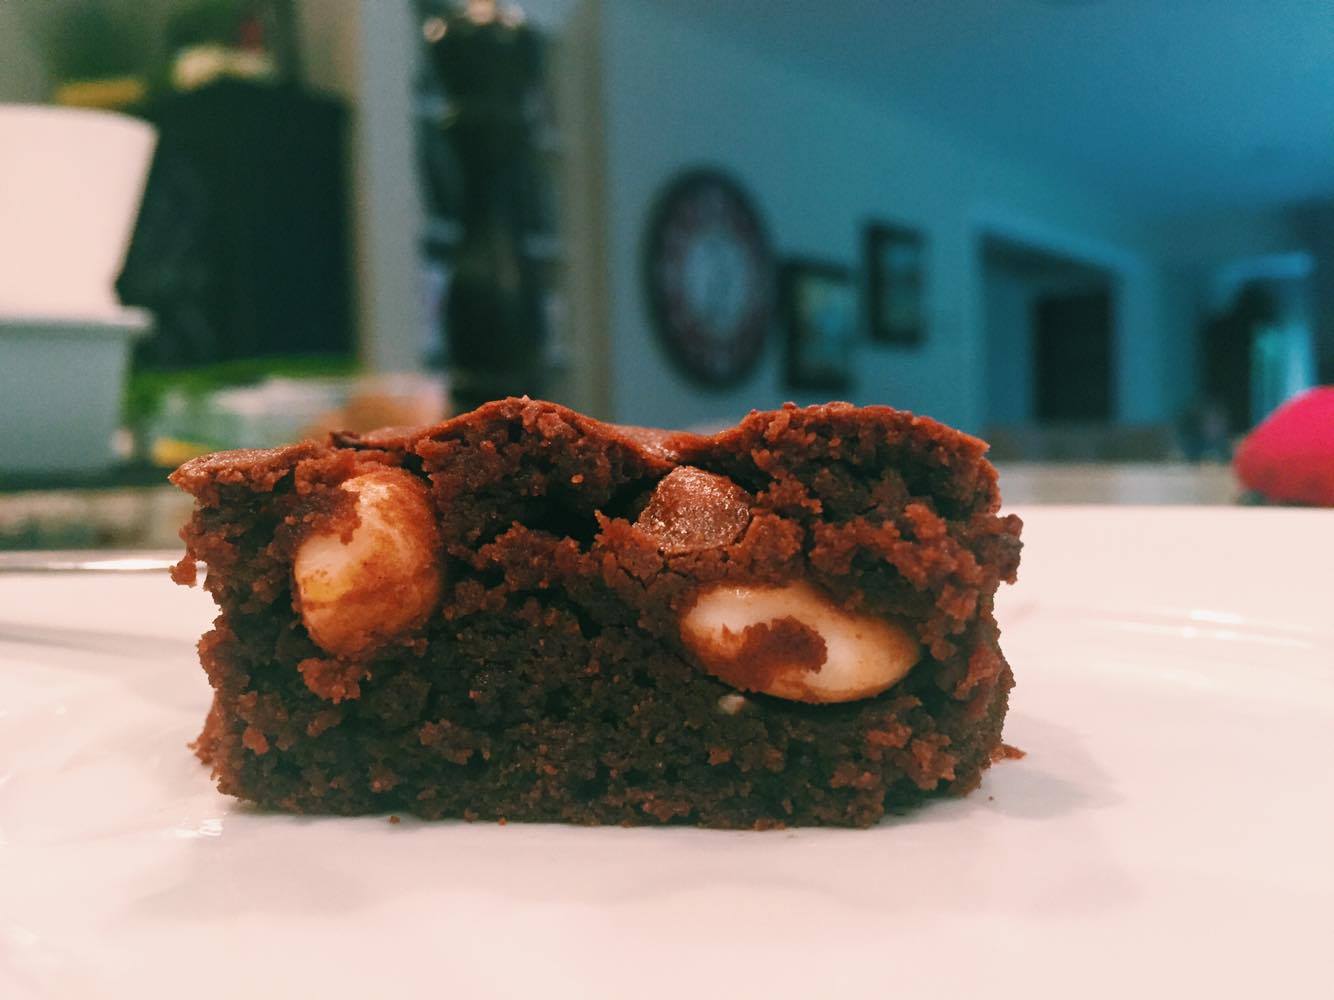 The Enthusiastic Foodie.: Chocolate Cashew Brownies